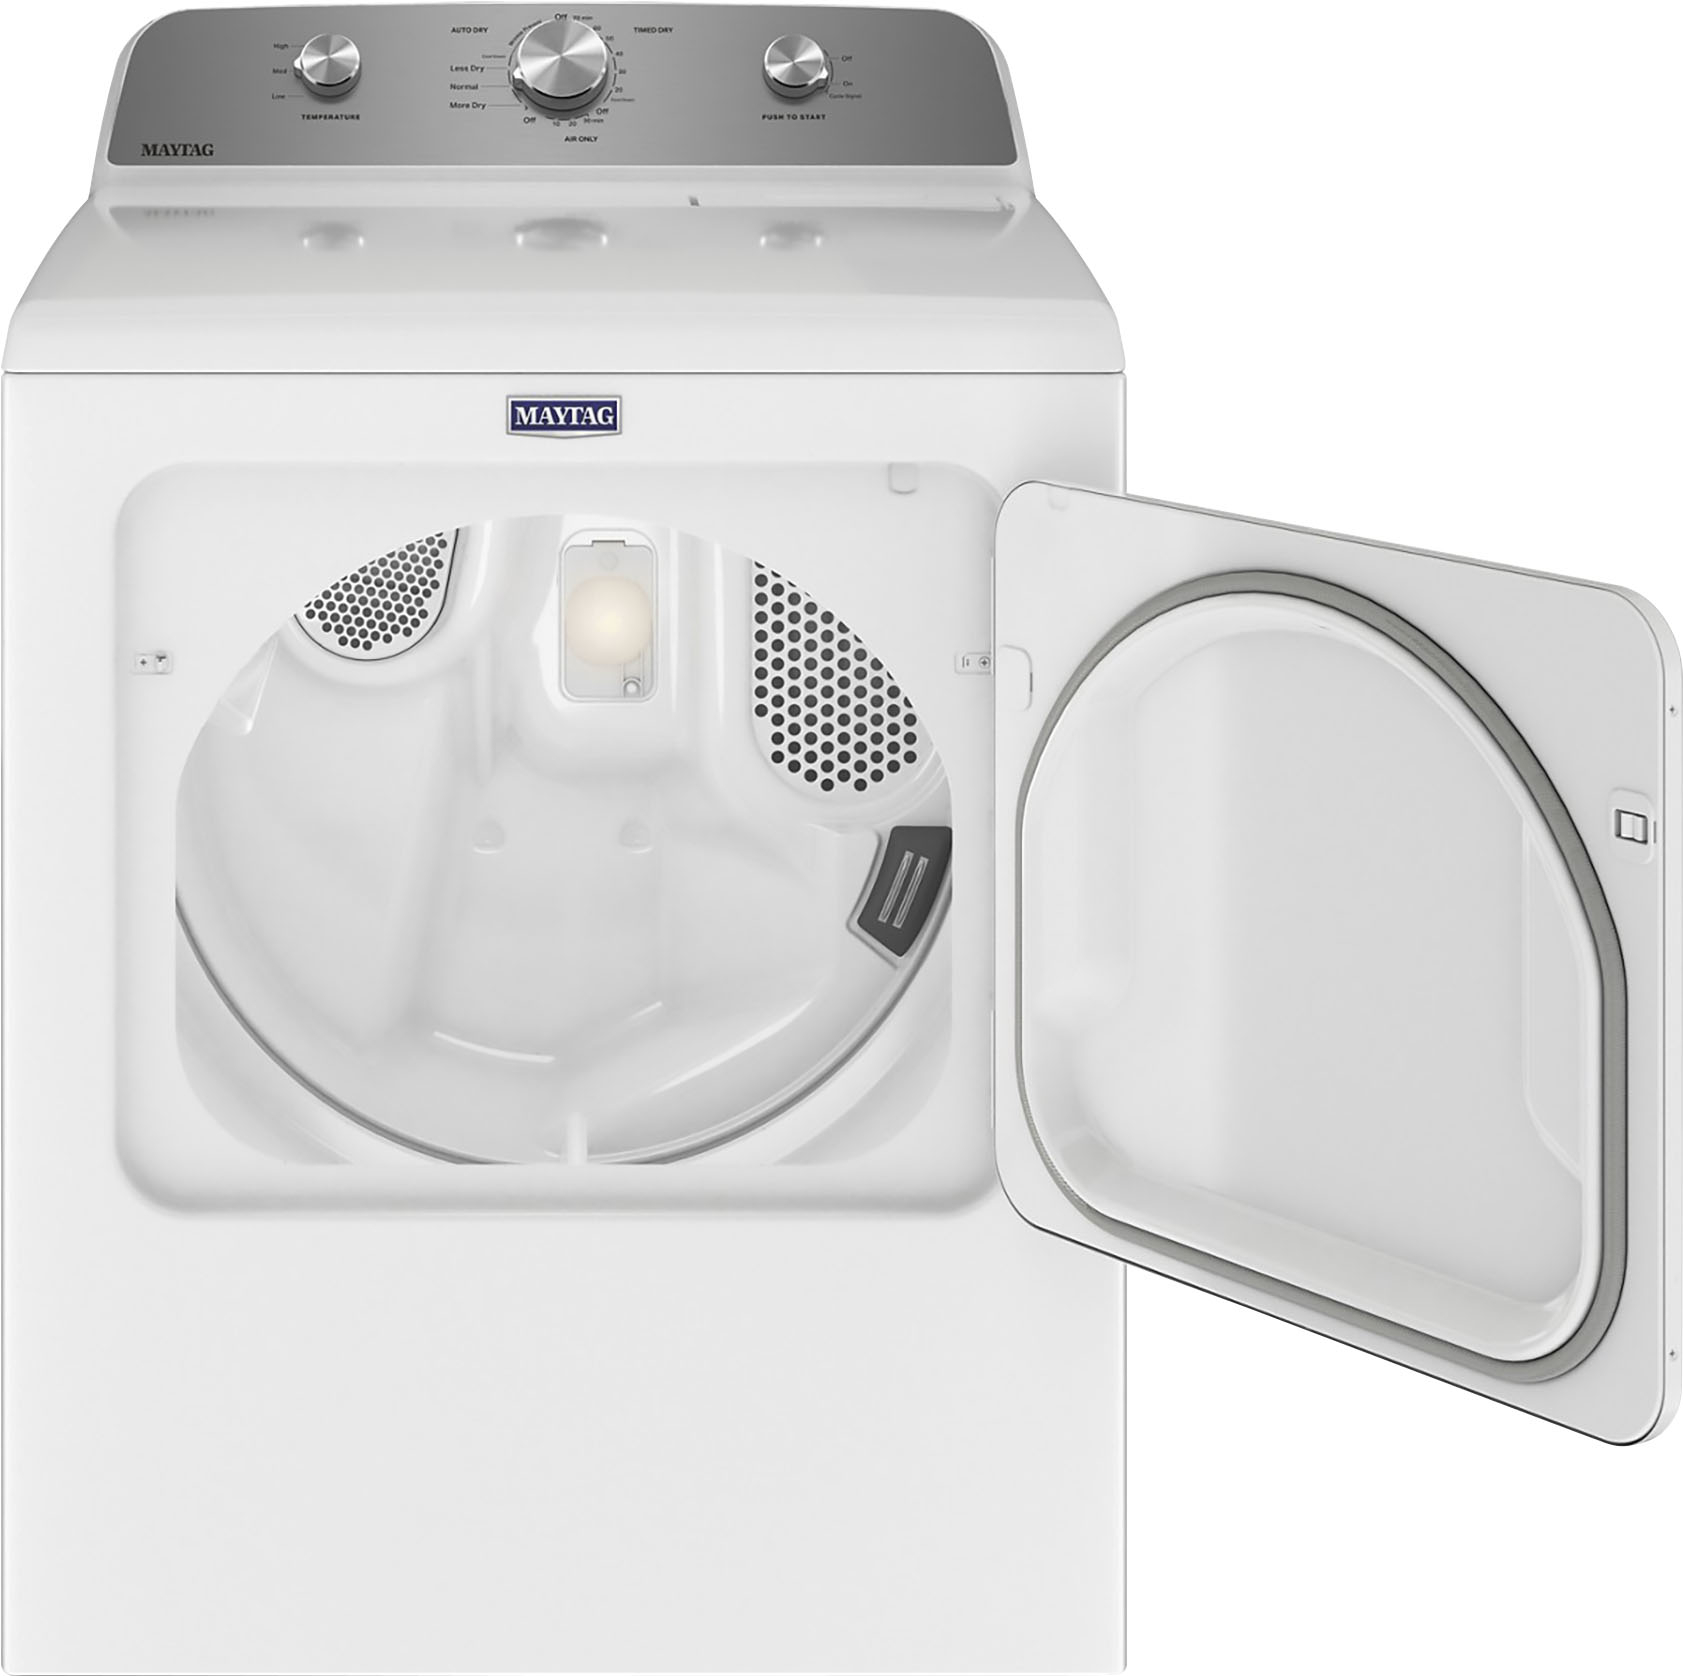 Angle View: Samsung - Geek Squad Certified Refurbished 7.2 Cu. Ft. Gas Dryer with Sensor Dry and 8 Drying Cycles - White